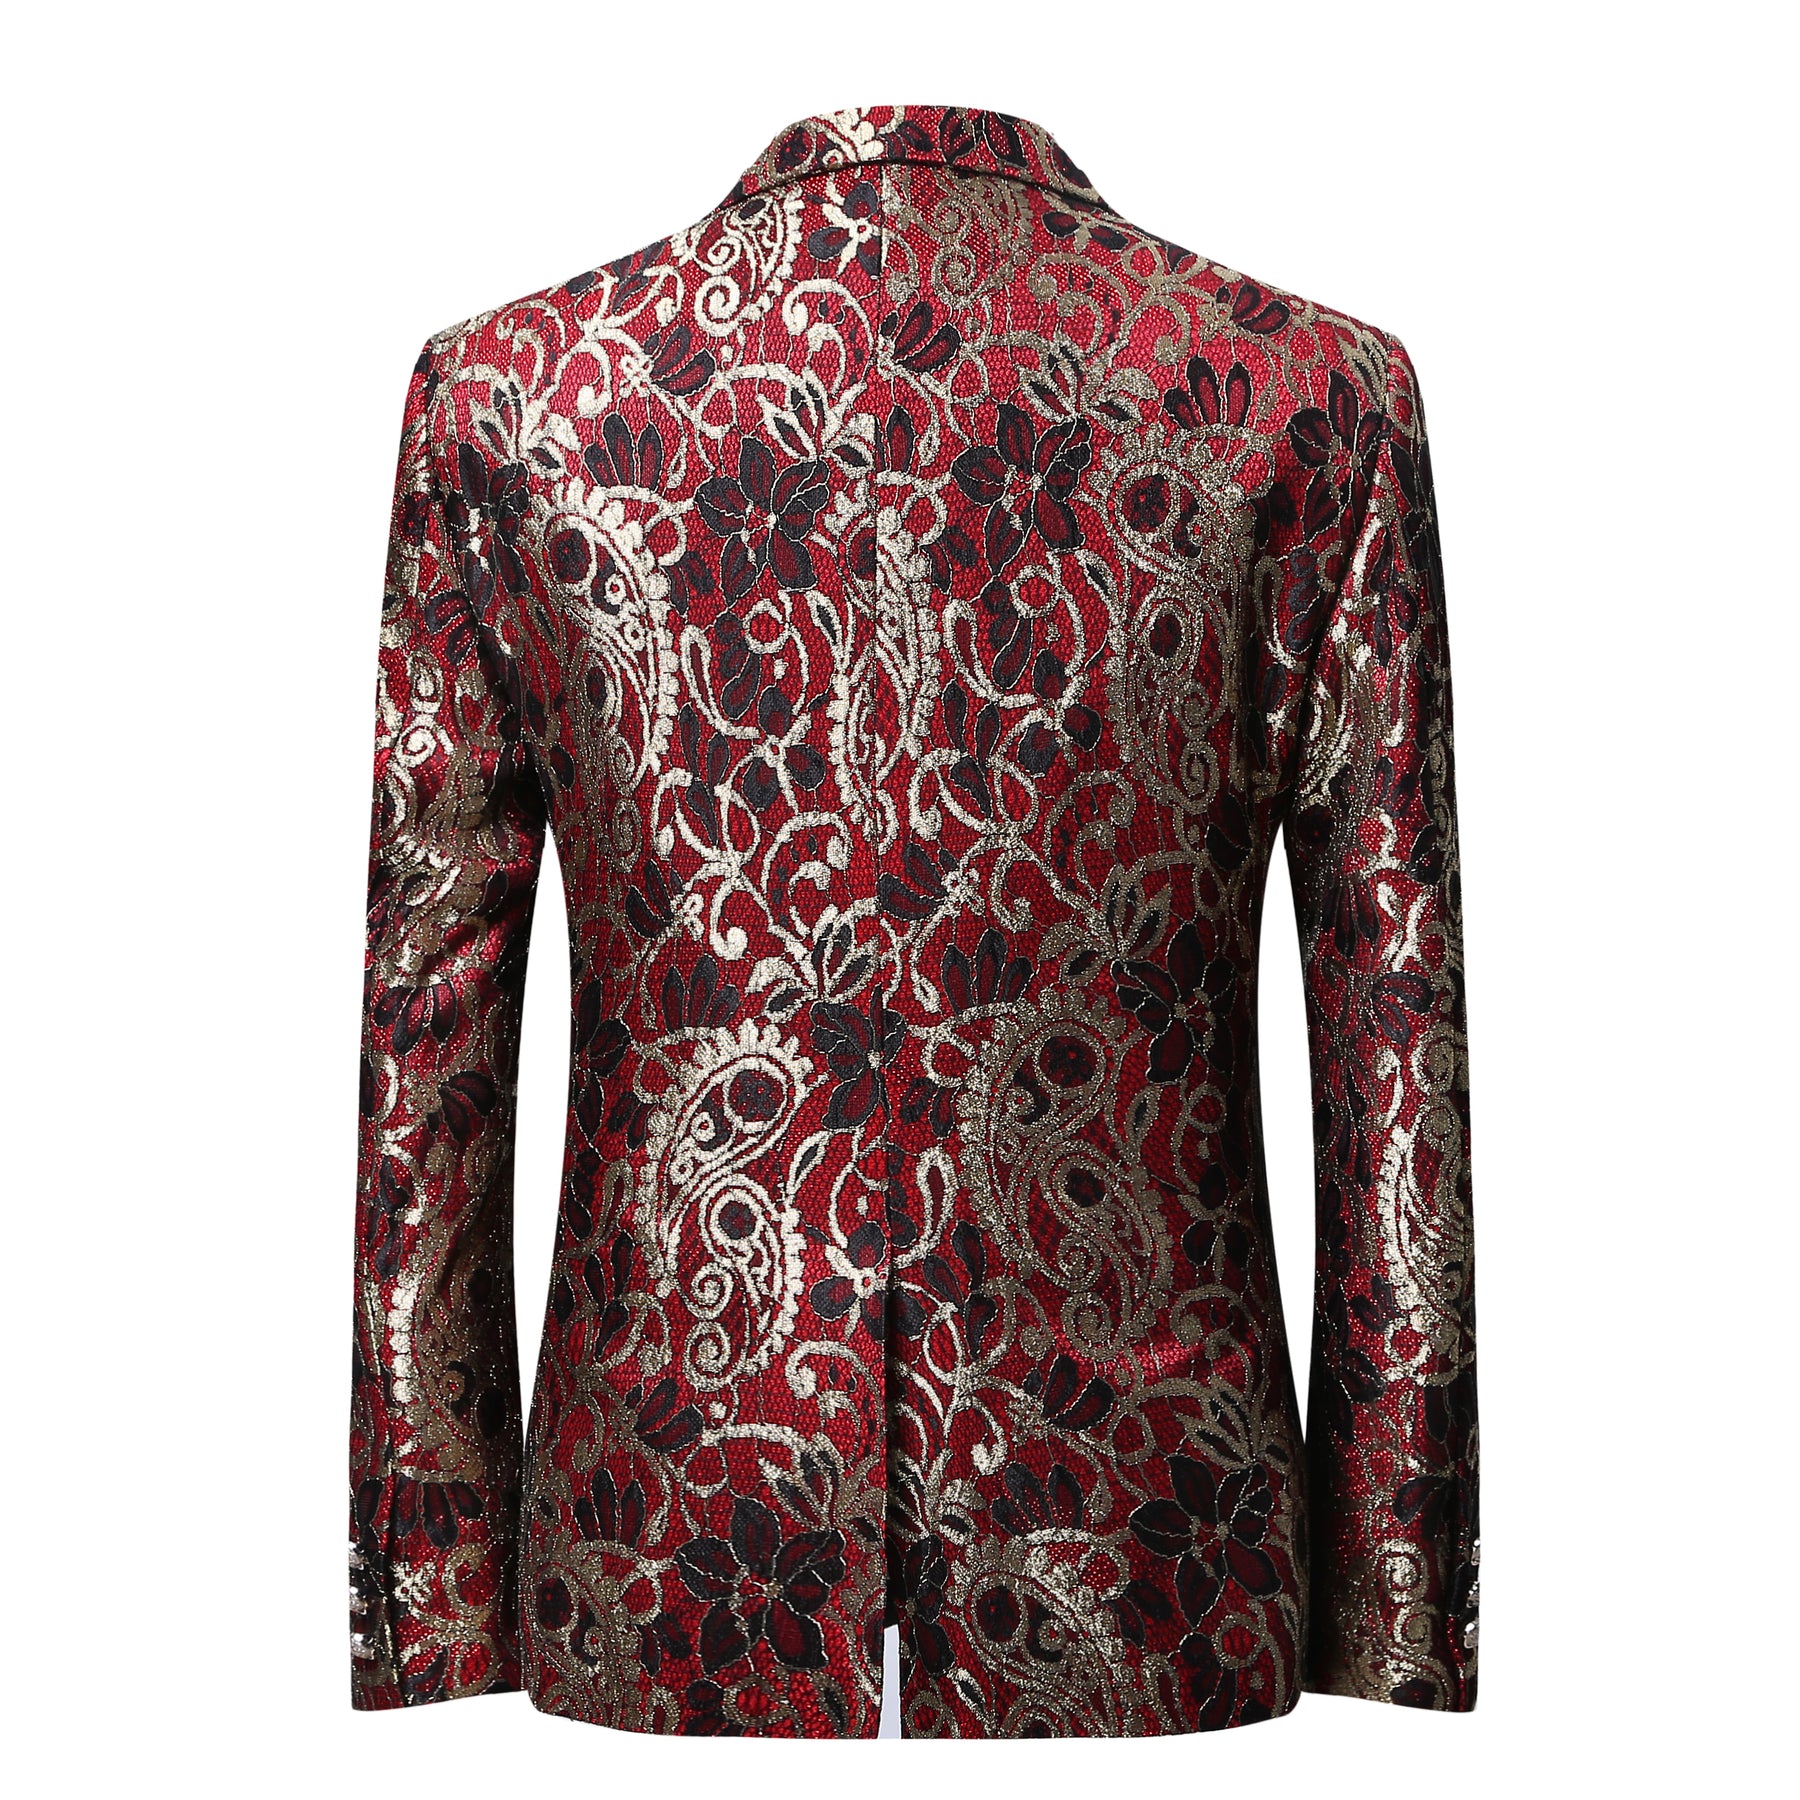 2-Piece Maroon Flower Printed Shiny Suits